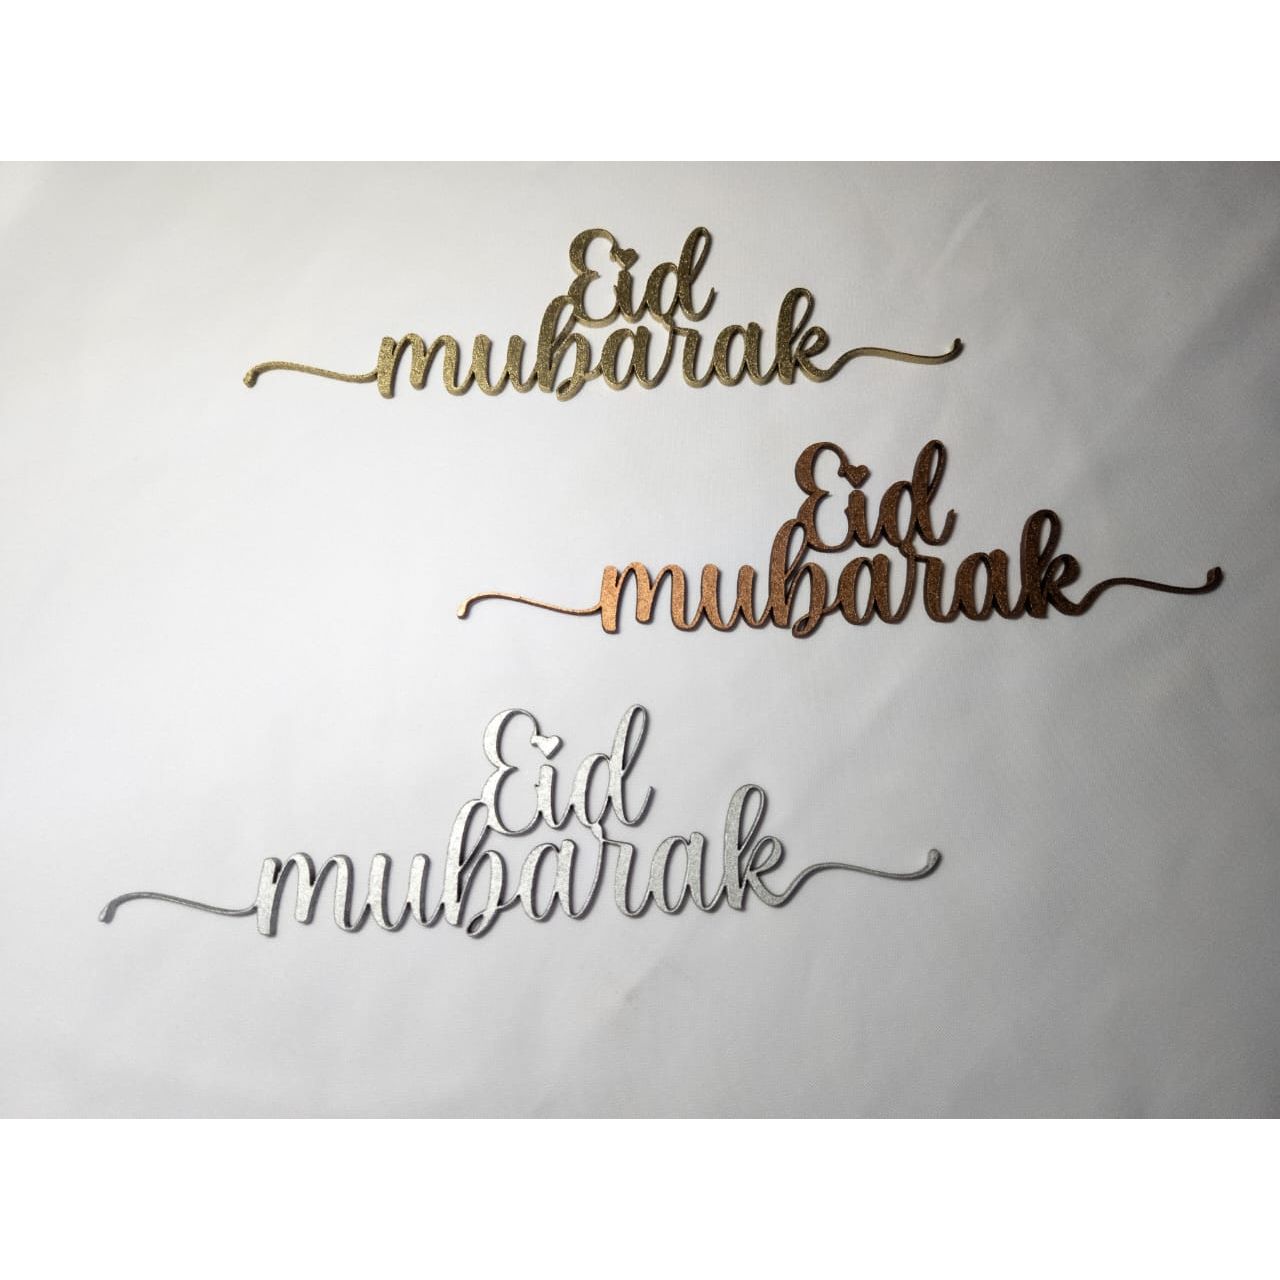 Eid Place Settings - Gold / Silver / Rose Gold (Set of 6)